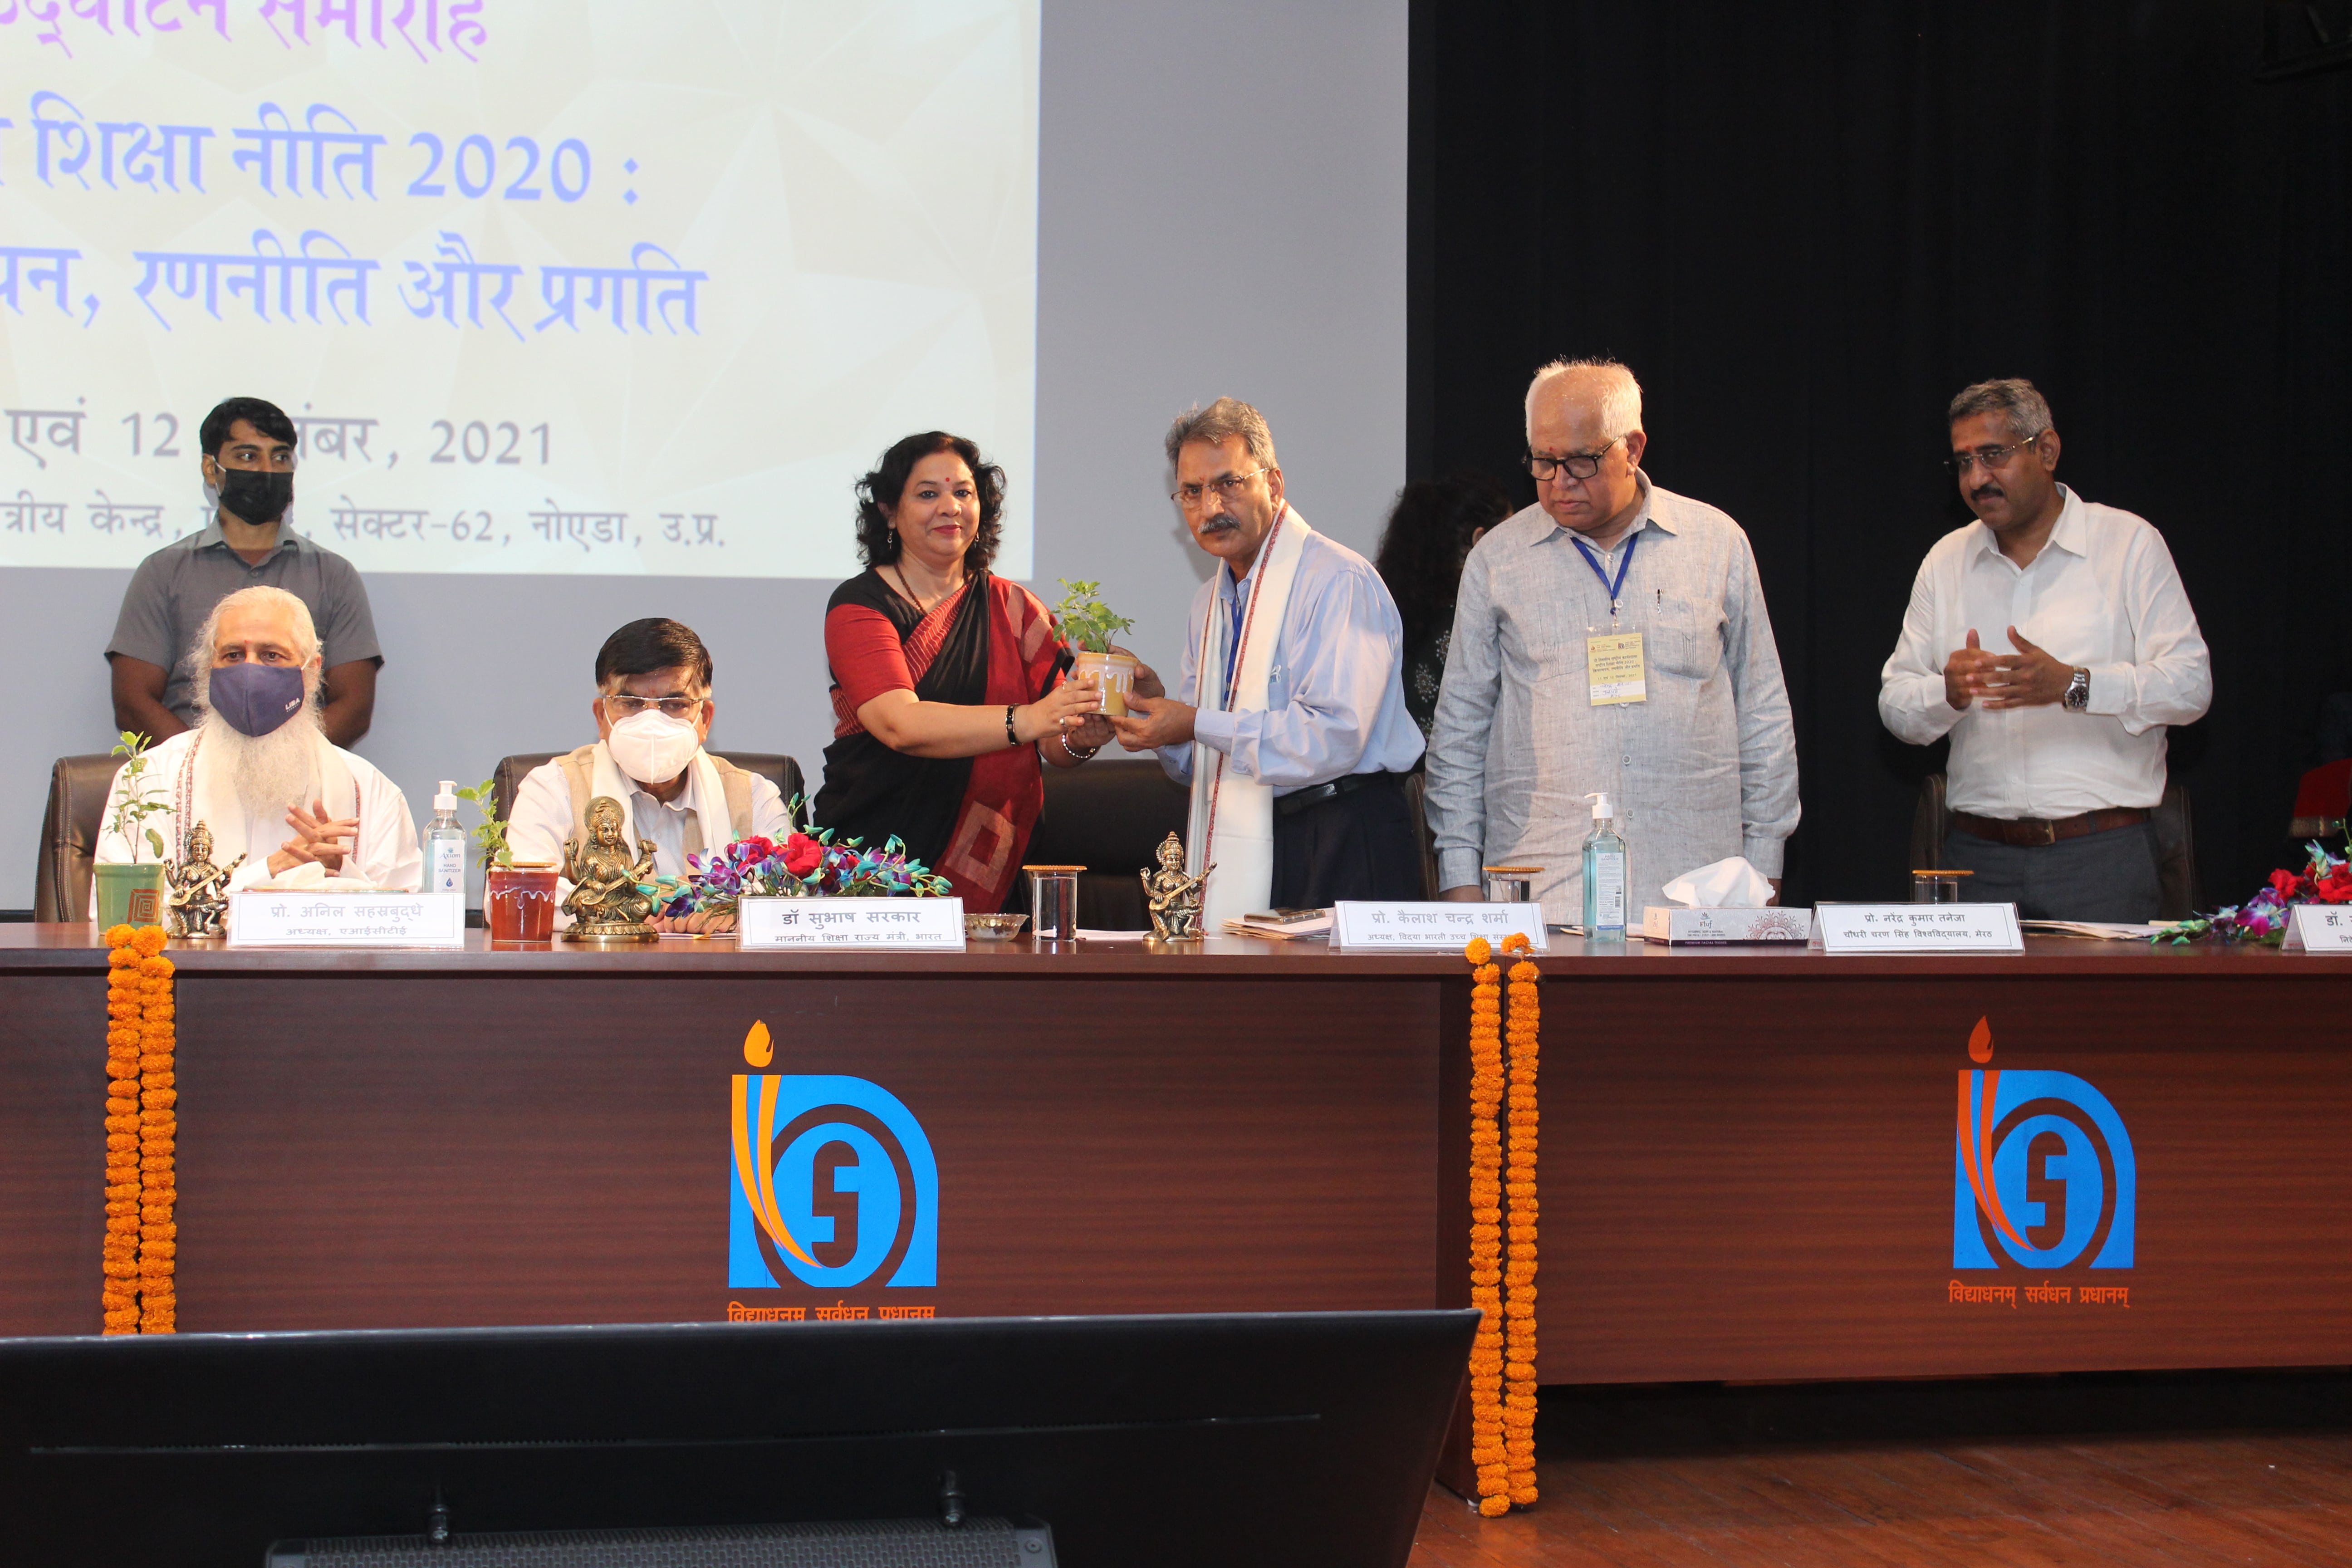 National Workshop of National Education Policy- 2020 on 11 & 12 Sept. 2021